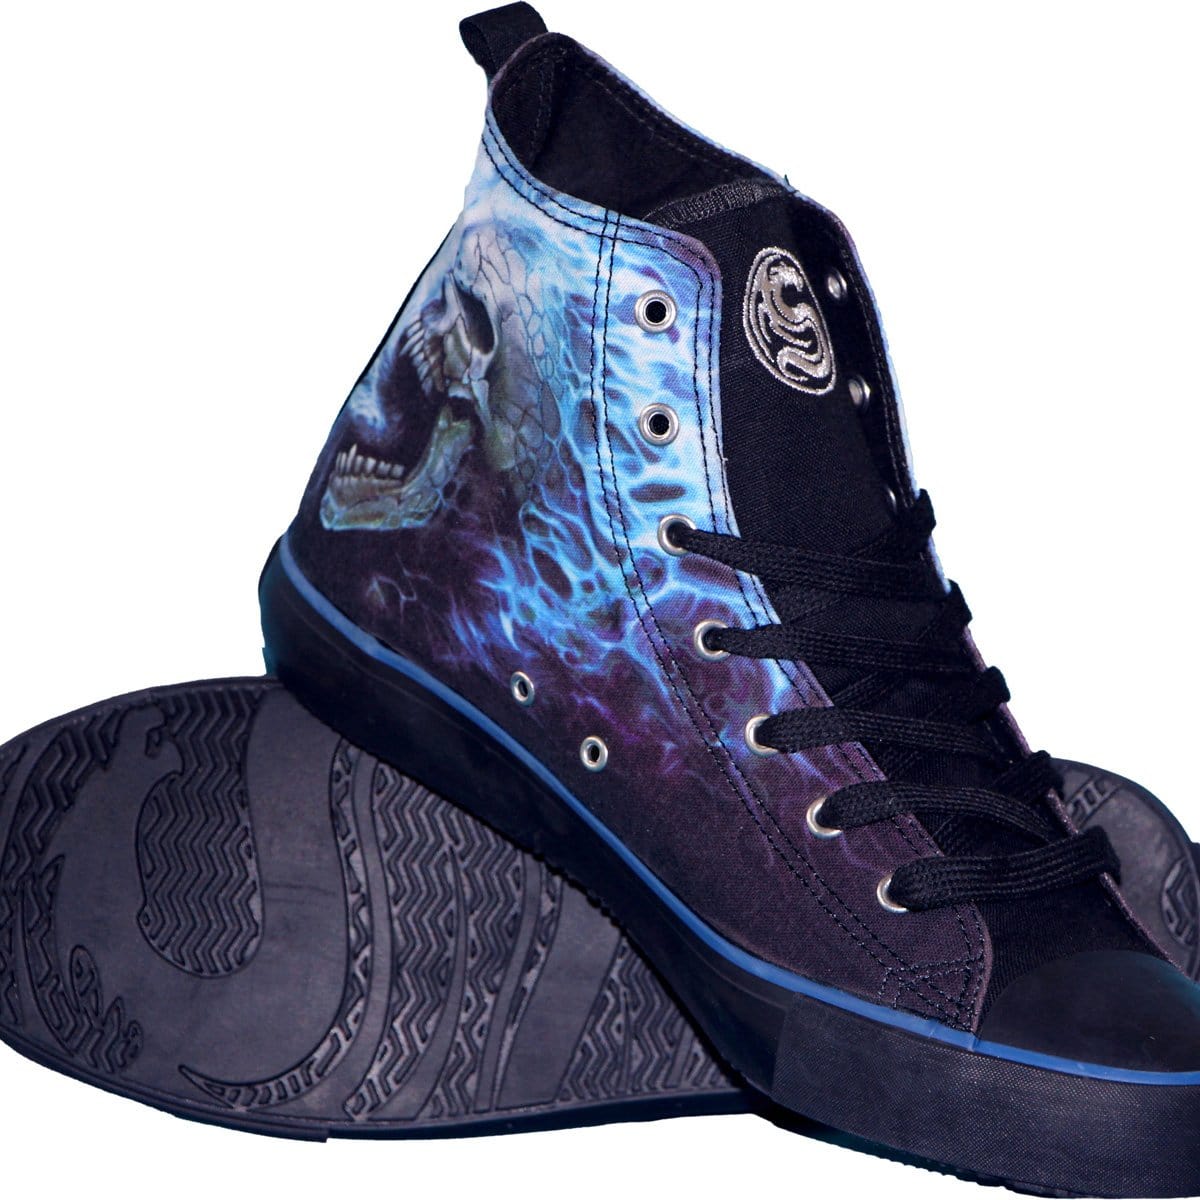 FLAMING SPINE - Sneakers - Ladies High Top Laceup - Spiral USA